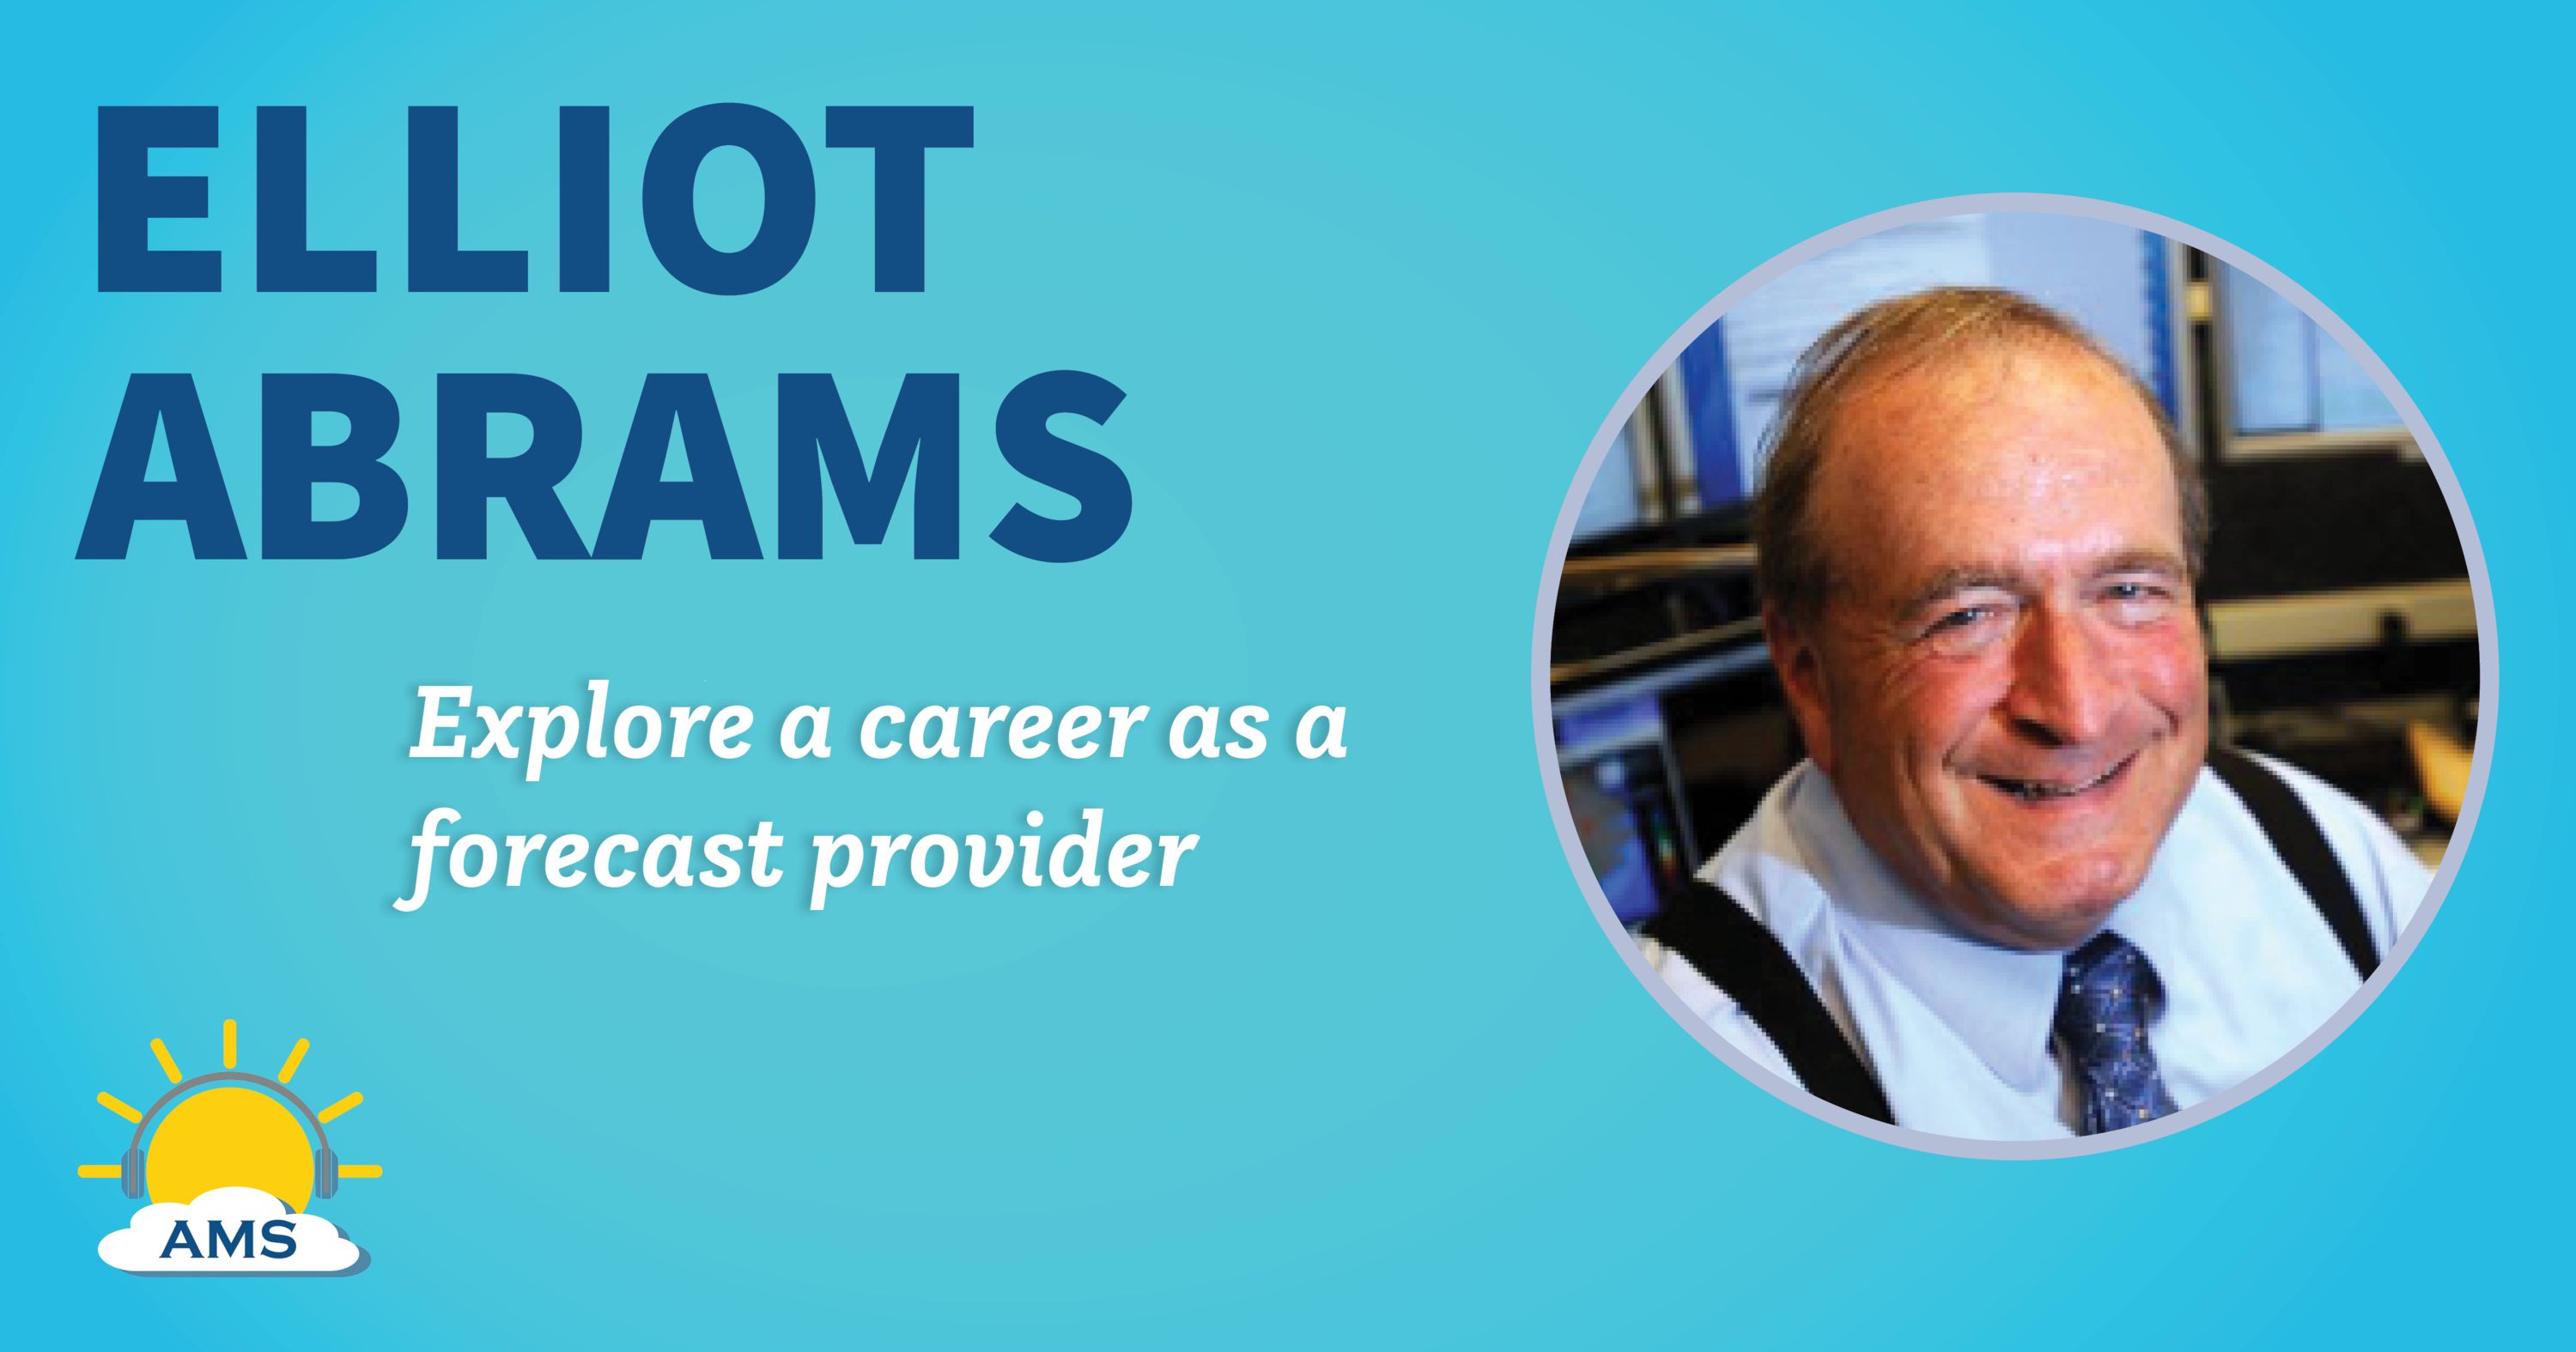 elliot abrams headshot graphic with teaser text that reads &quotexplore a career as a forecast provider"